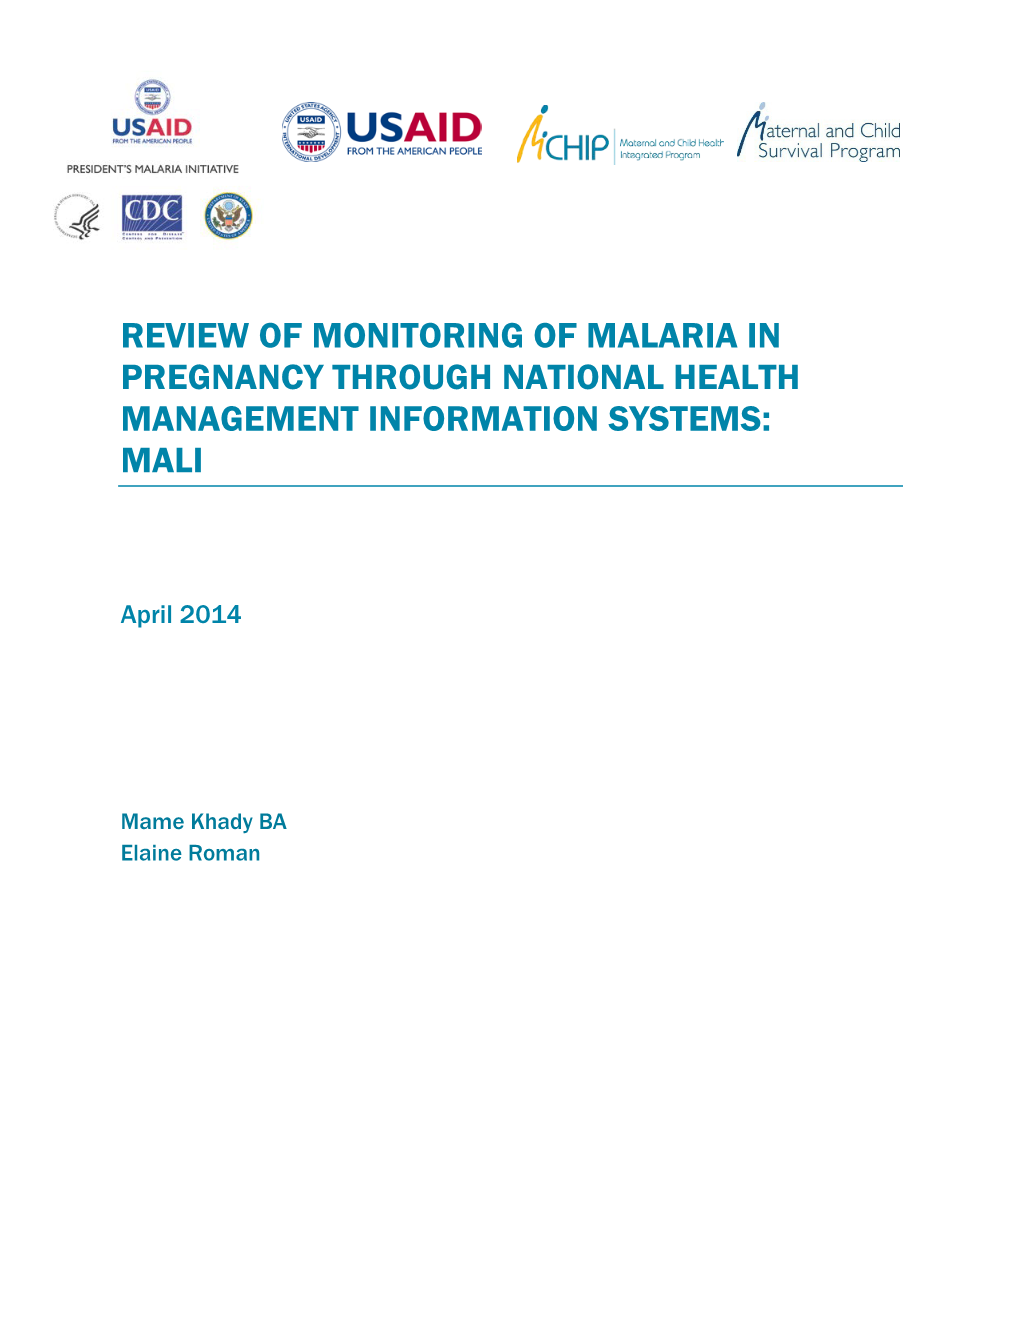 Review of Monitoring of Malaria in Pregnancy Through National Health Management Information Systems: Mali